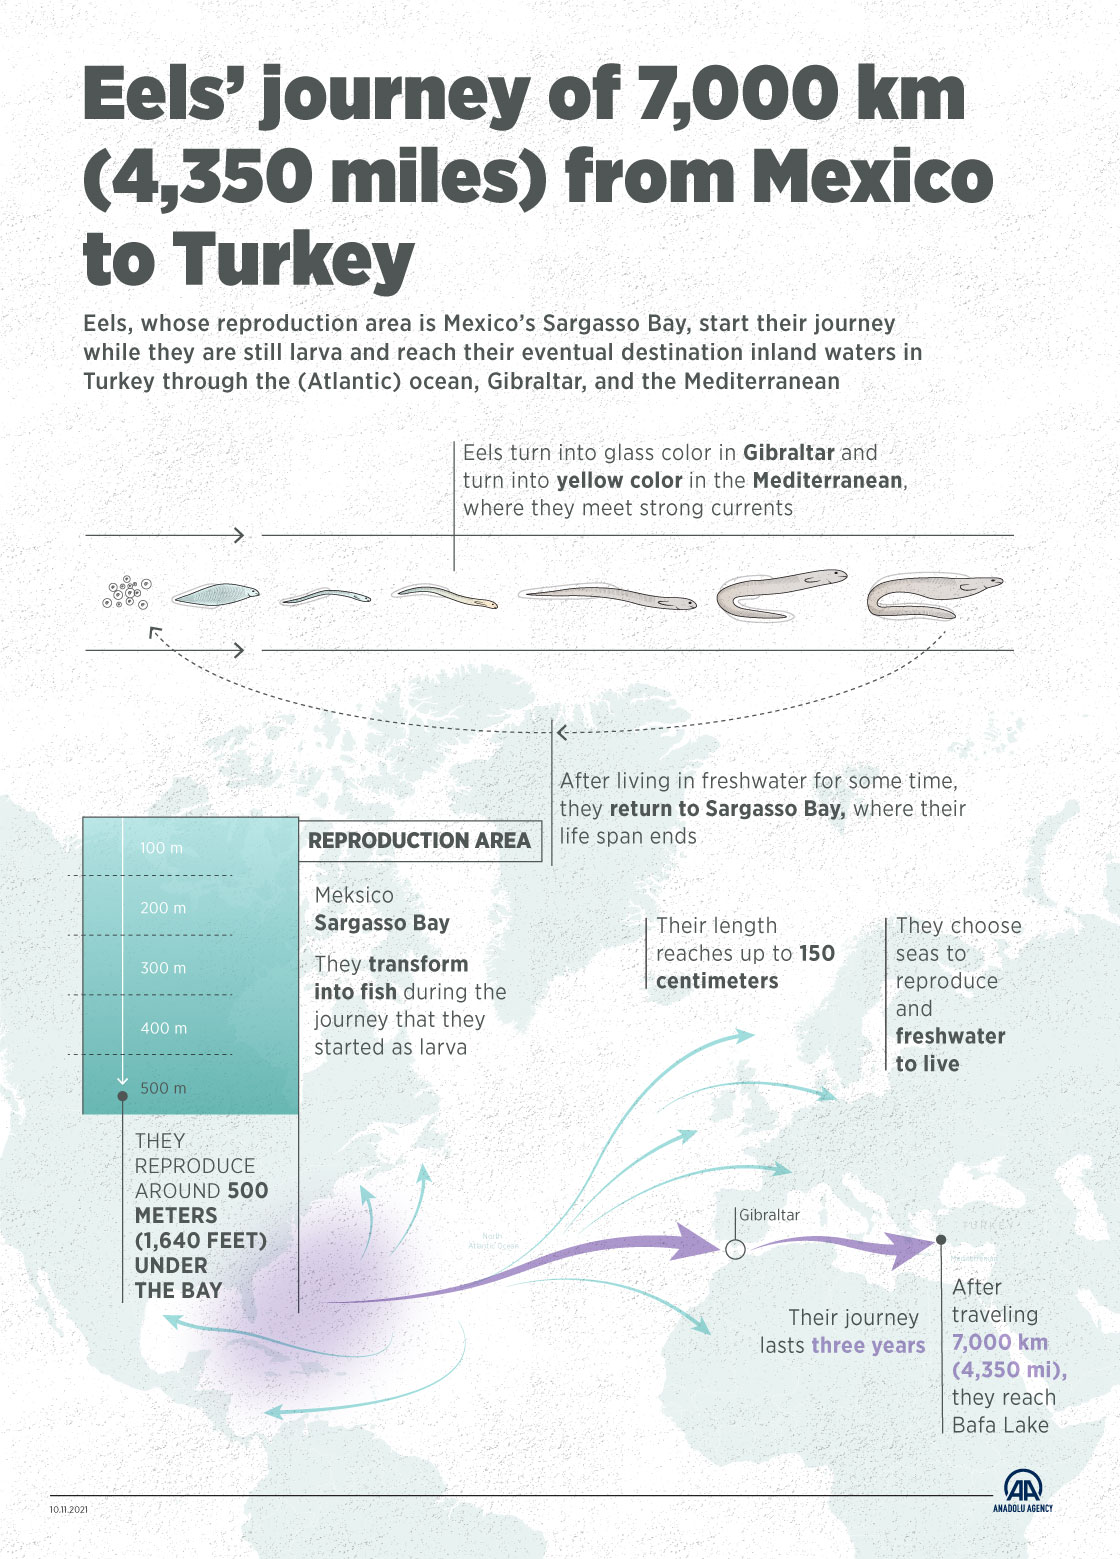 Eels’ journey of 7,000 km (4,350 miles) from Mexico to Turkey